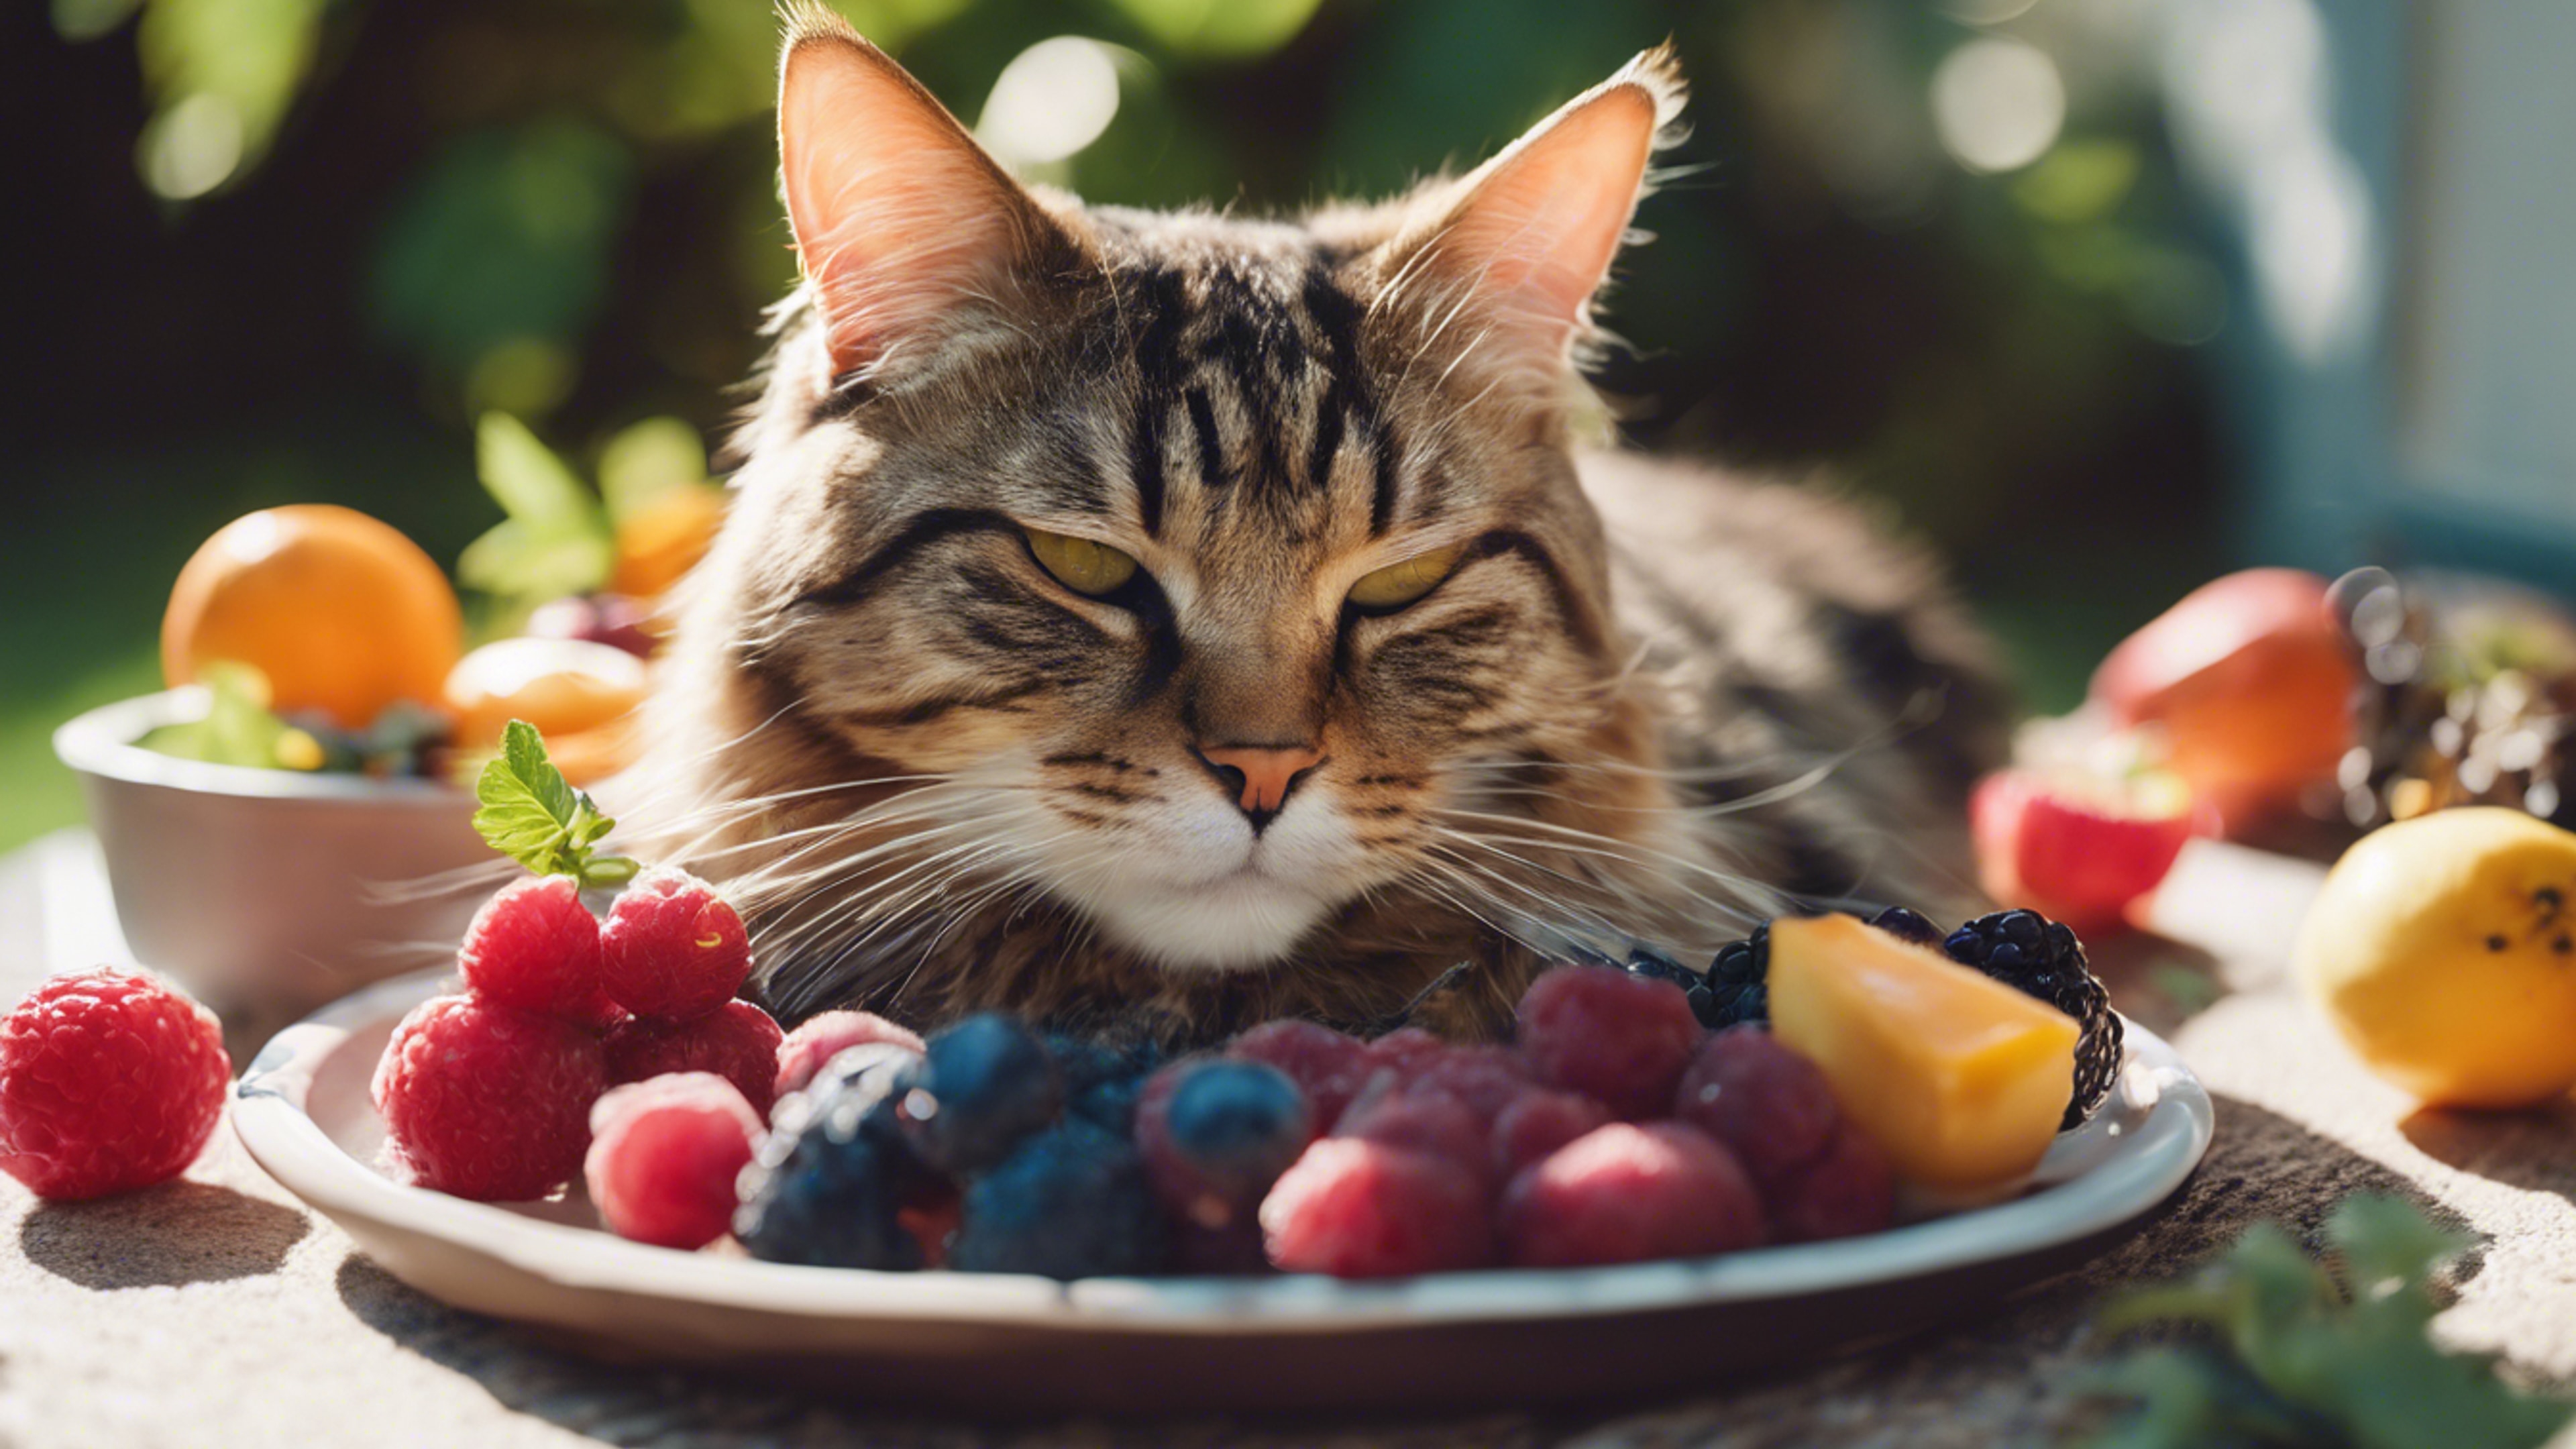 A sleepy Maine Coon cat relaxing next to a bowl of vibrant summer fruits. Tapéta[5a3905f0581c45108121]